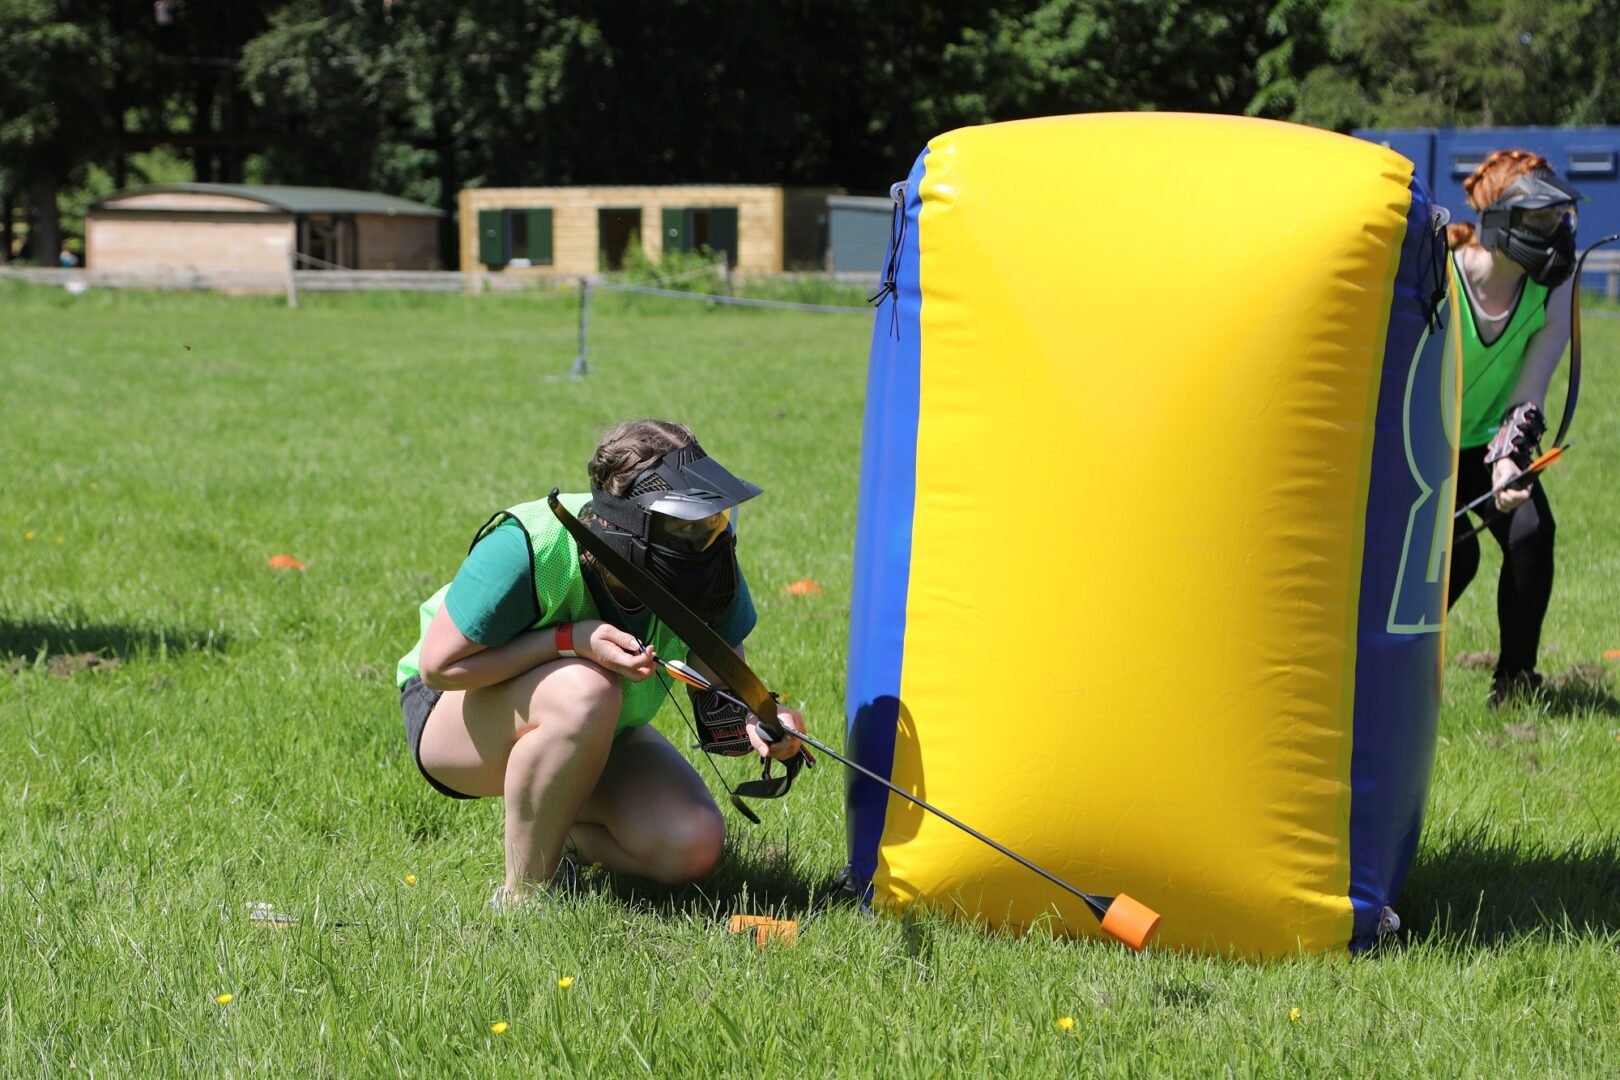 Archery Tag player hiding behind inflatable